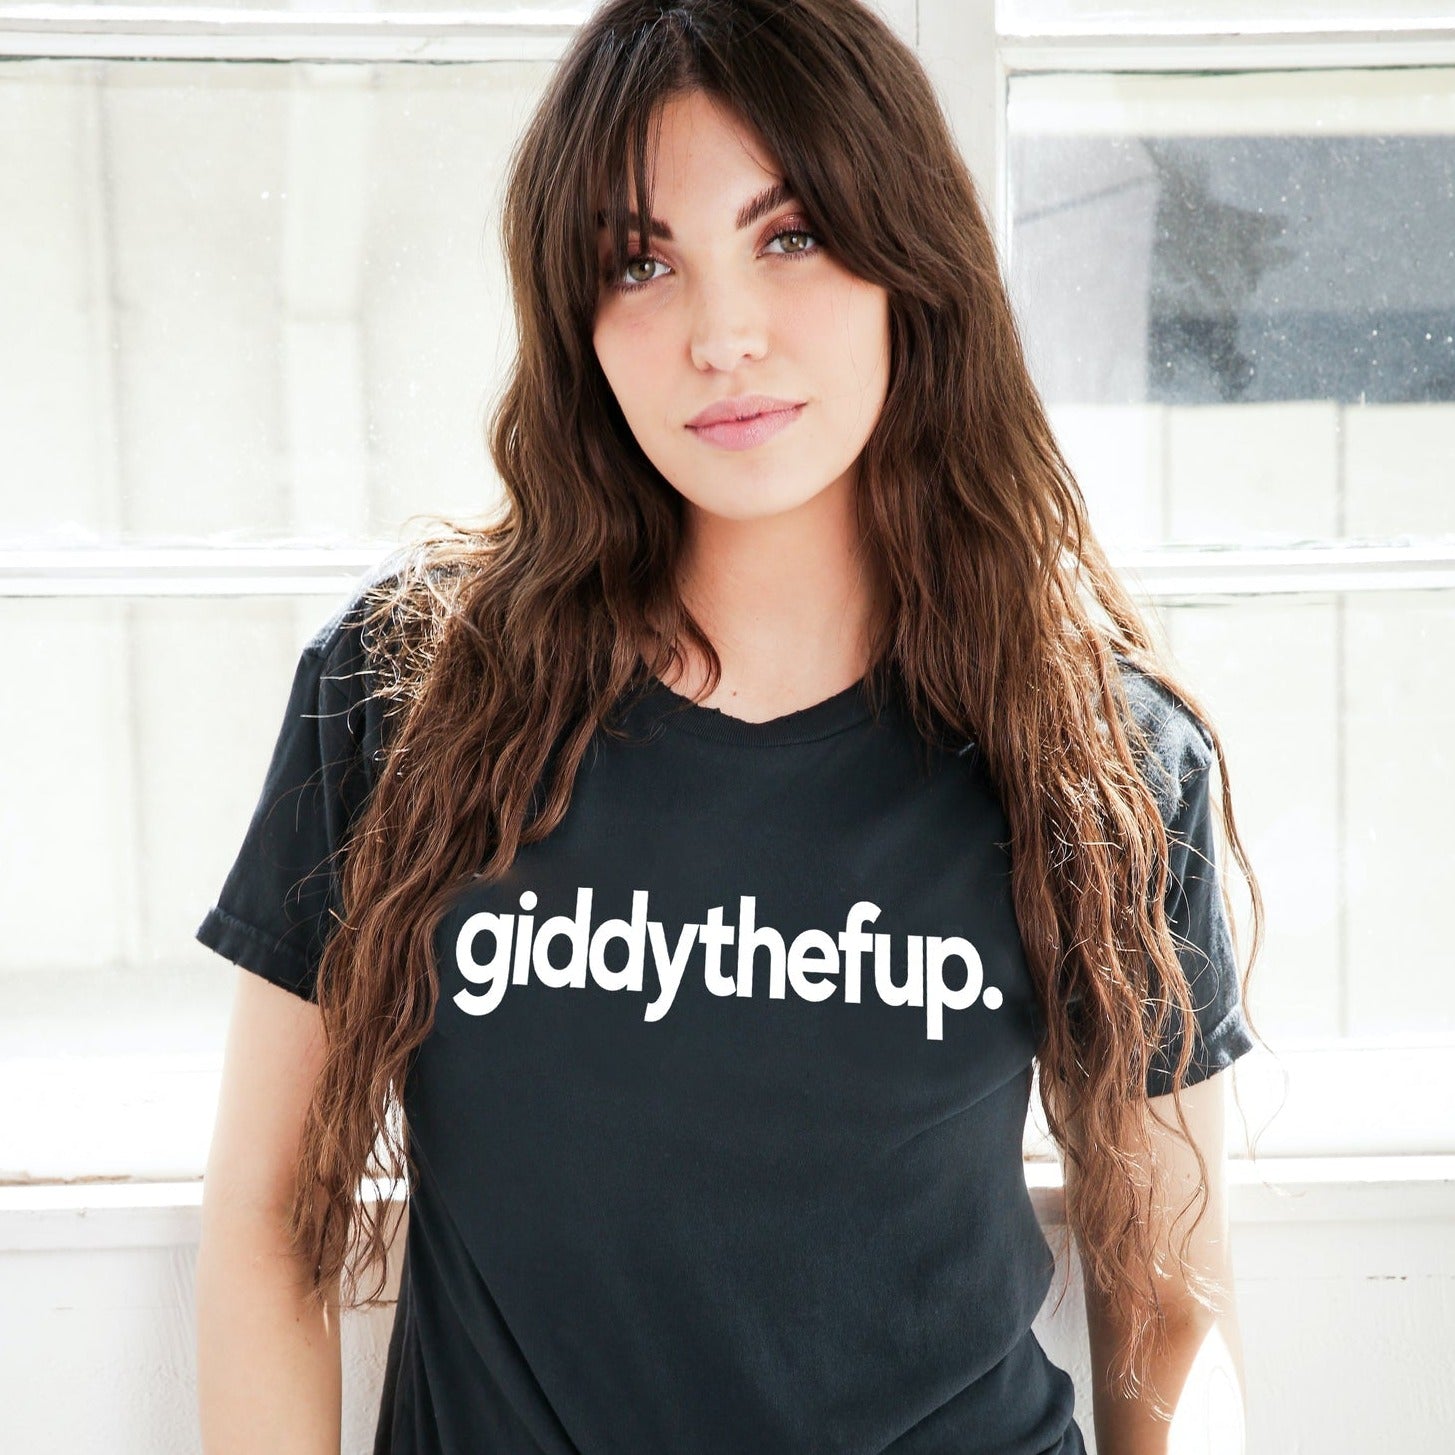 Black distressed short sleeve t shirt with white text "giddythefup"